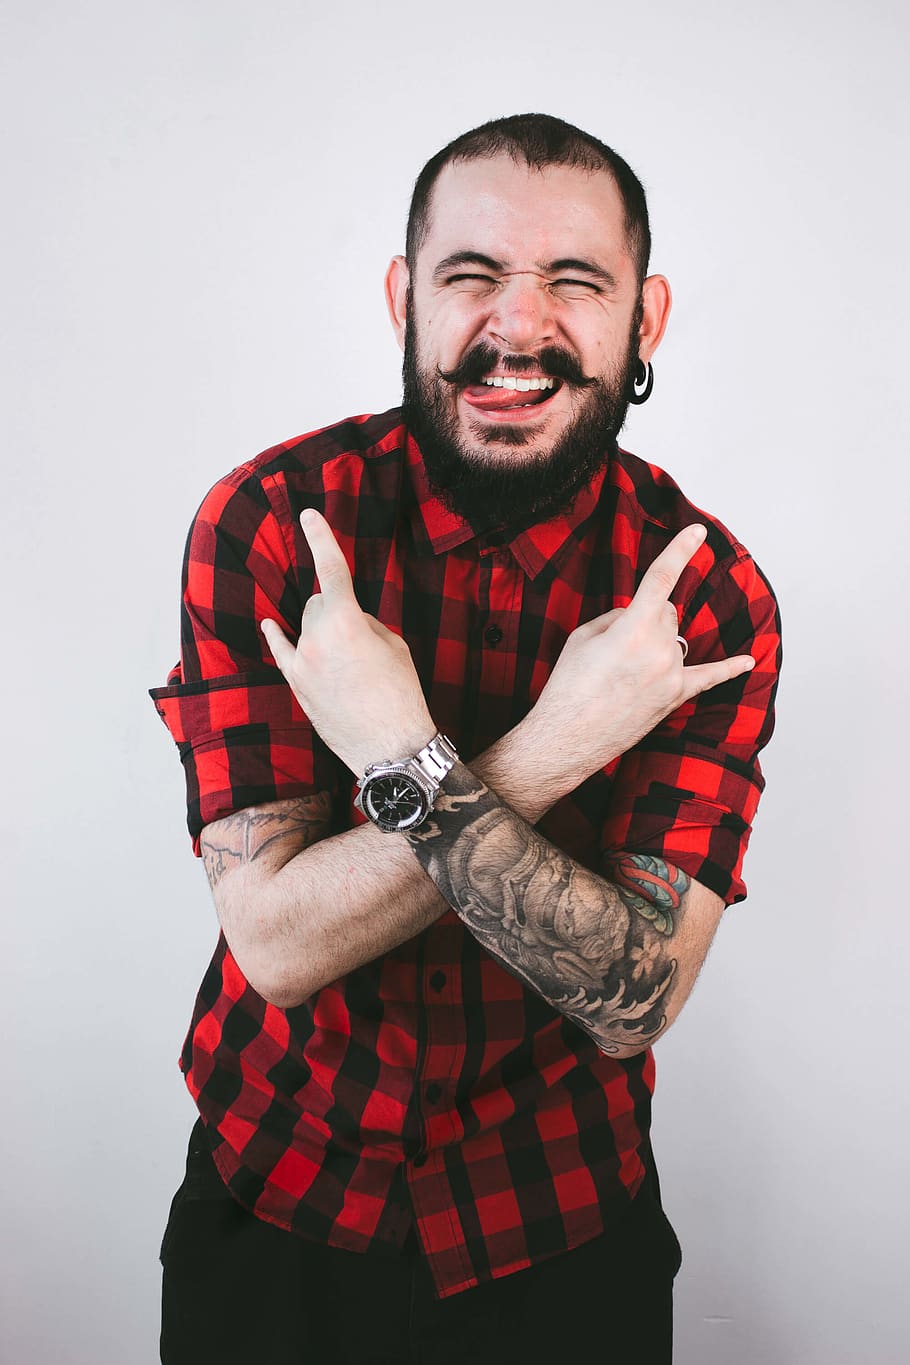 man wearing red and black checked button-up shirt doing rock hand sign